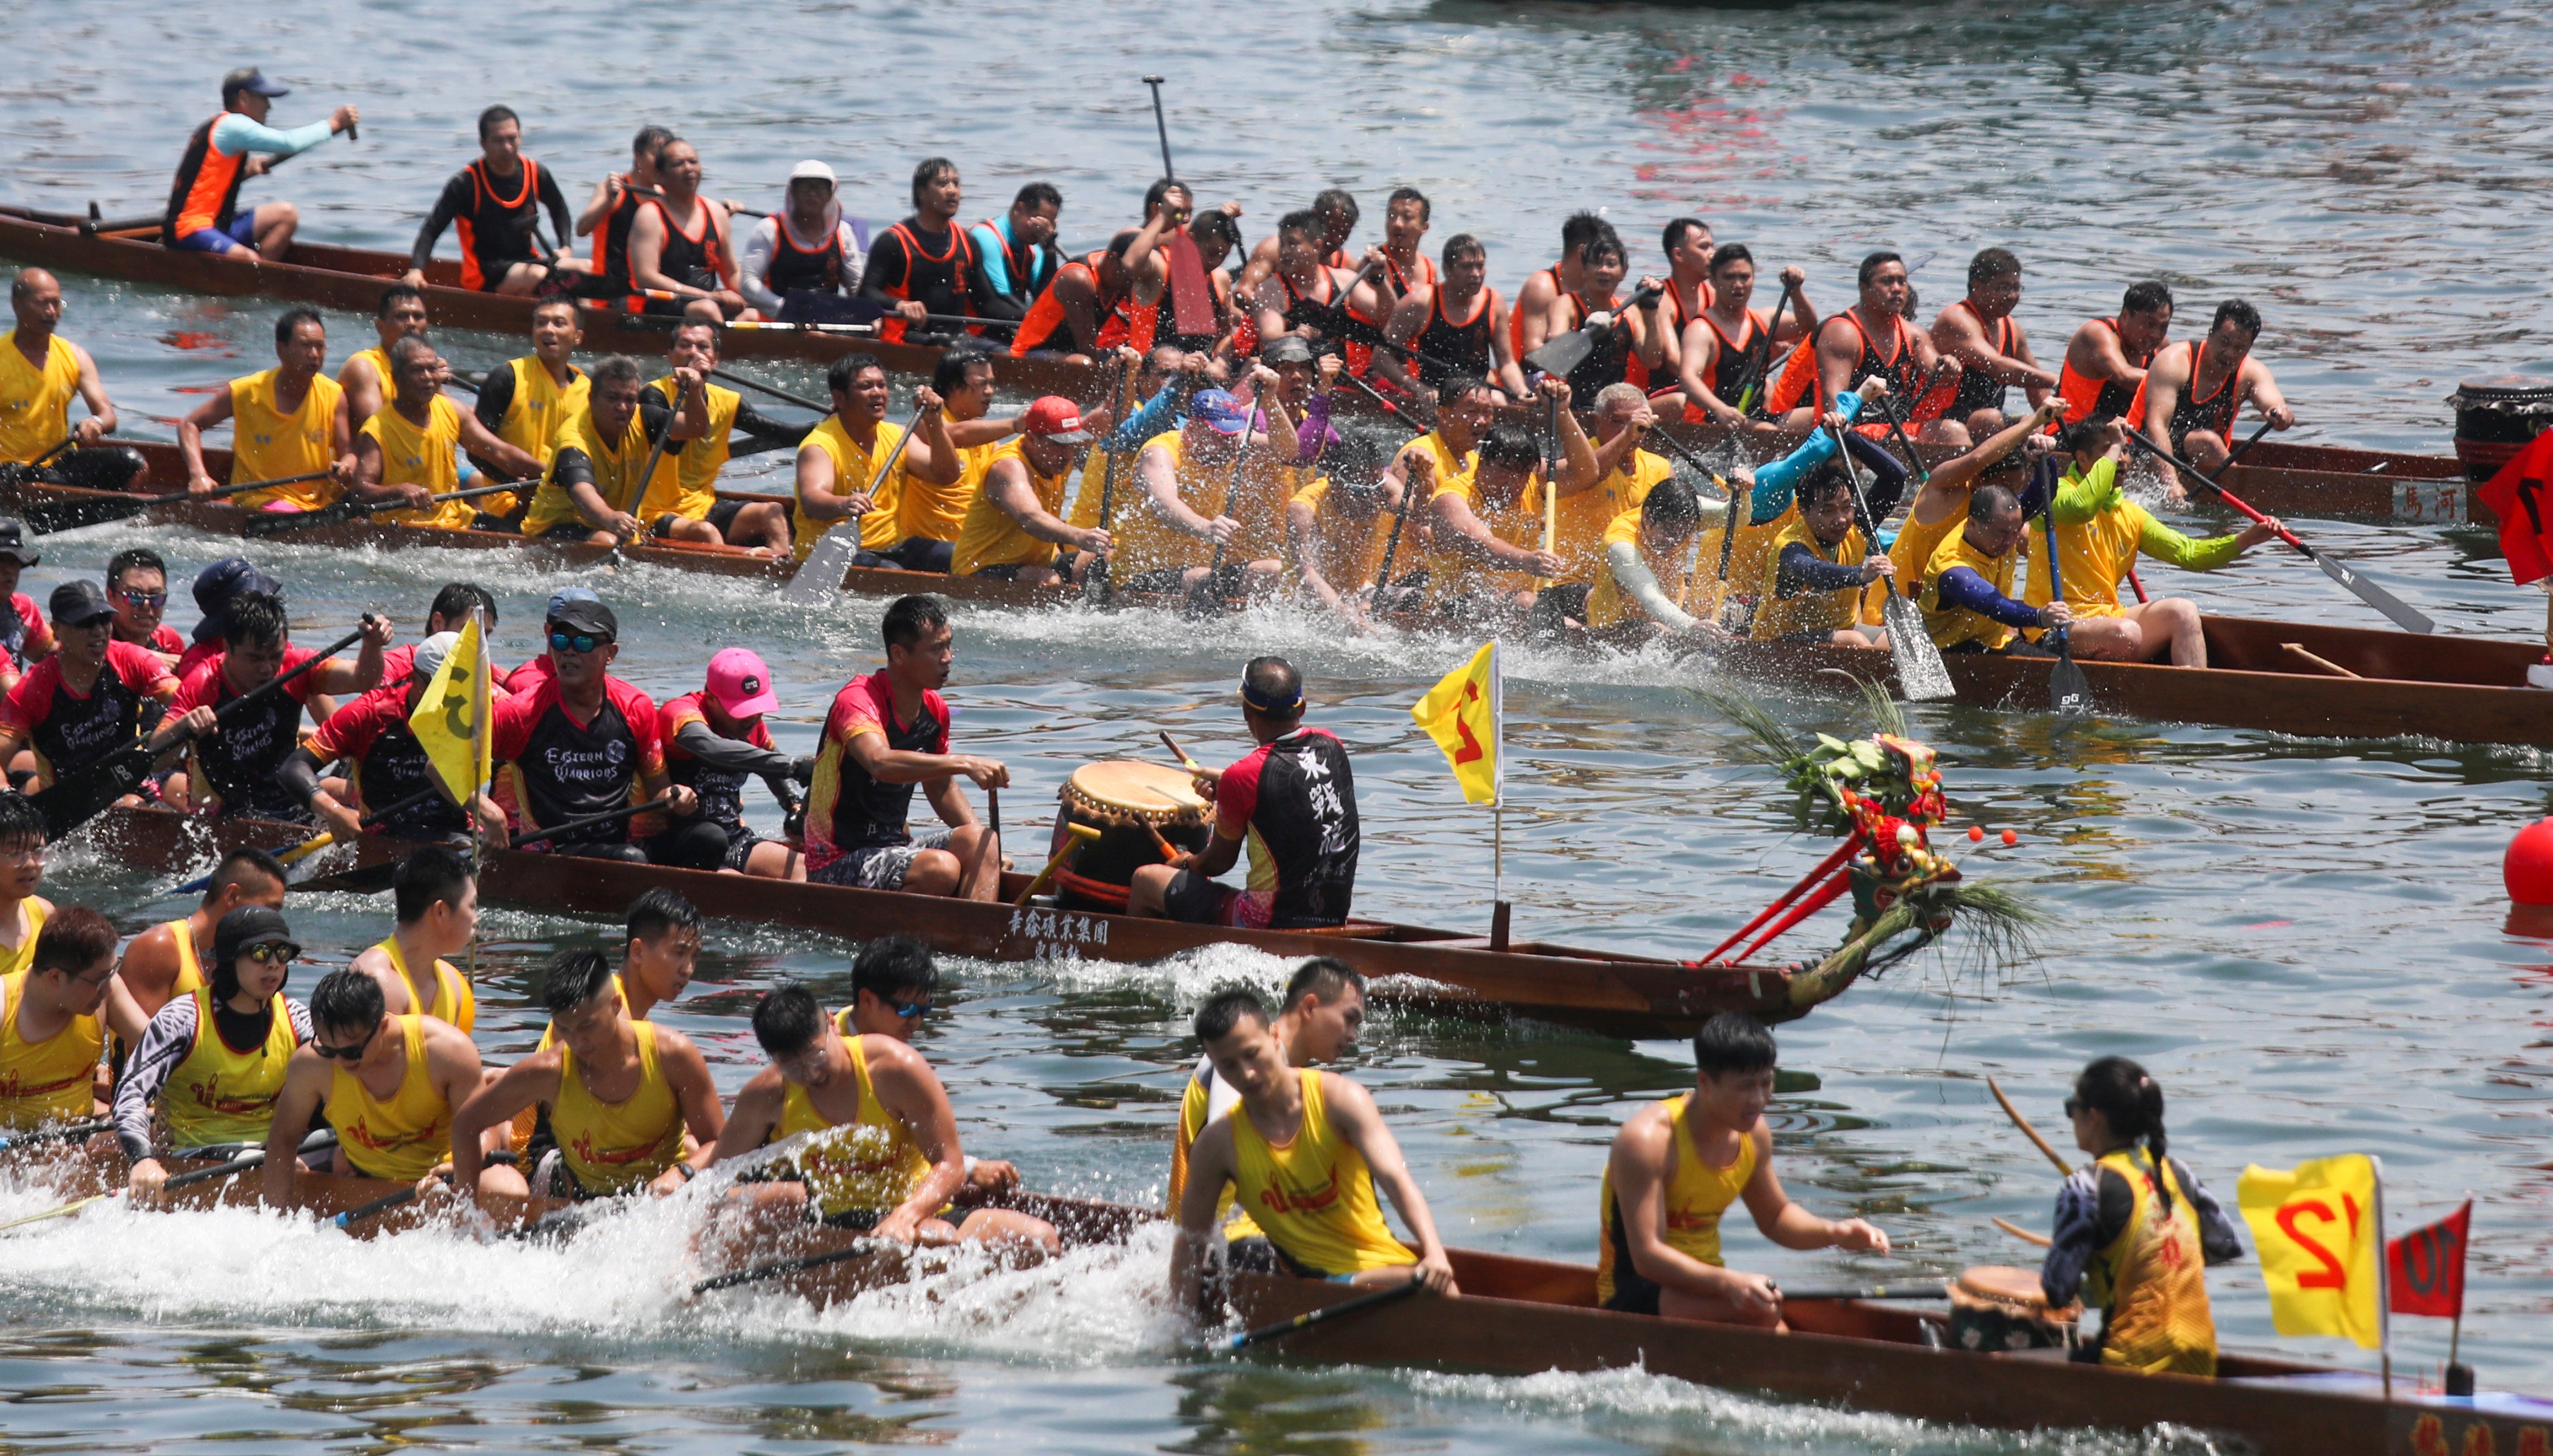 While the annual dragon races draw thousands of spectators, the craft of dragon boat building in Hong Kong is slowly dying. Photo: Xiaomei Chen